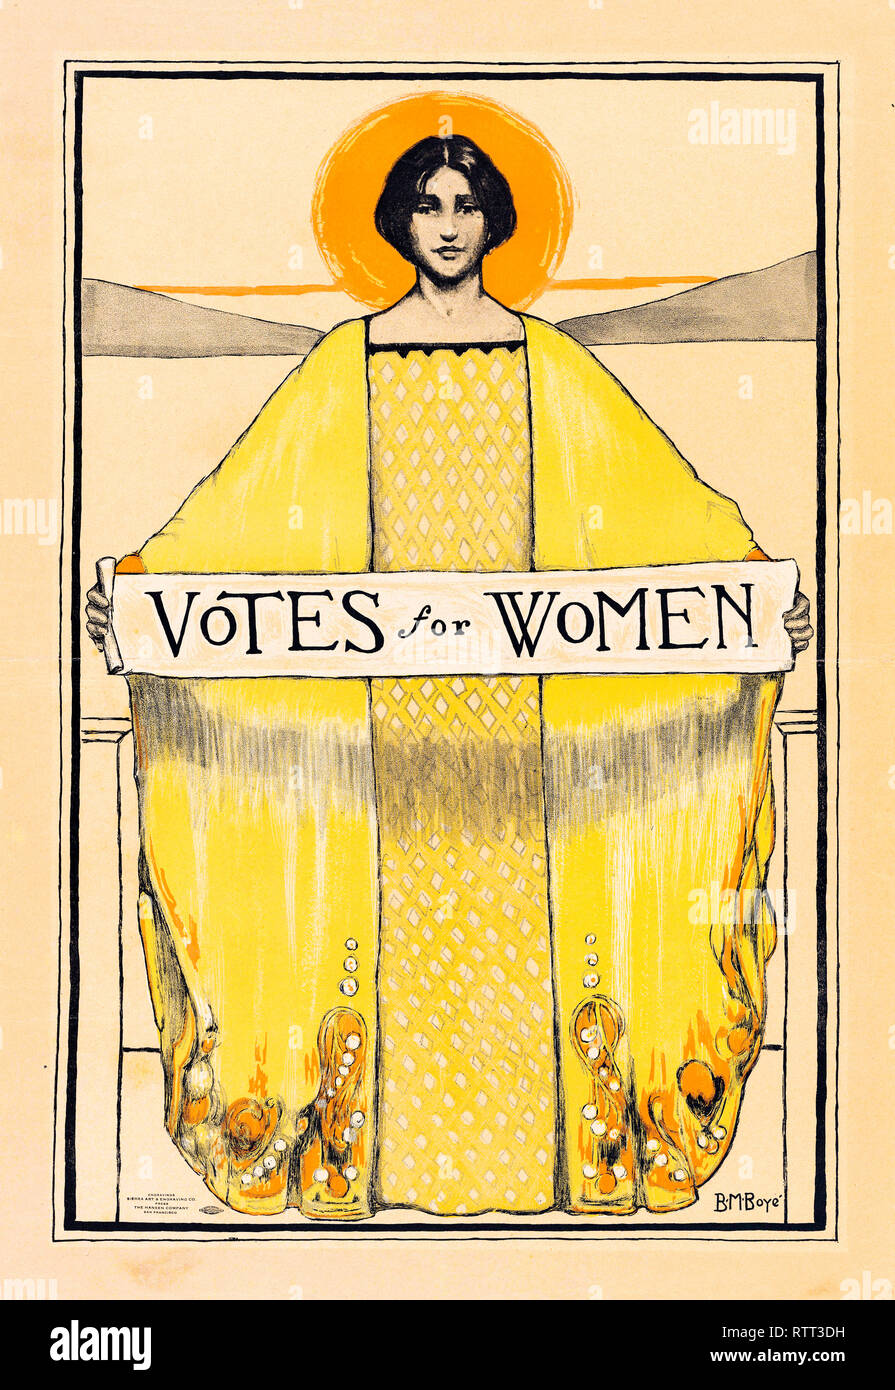 Votes for Women poster, women's suffrage, 1913, UK Stock Photo